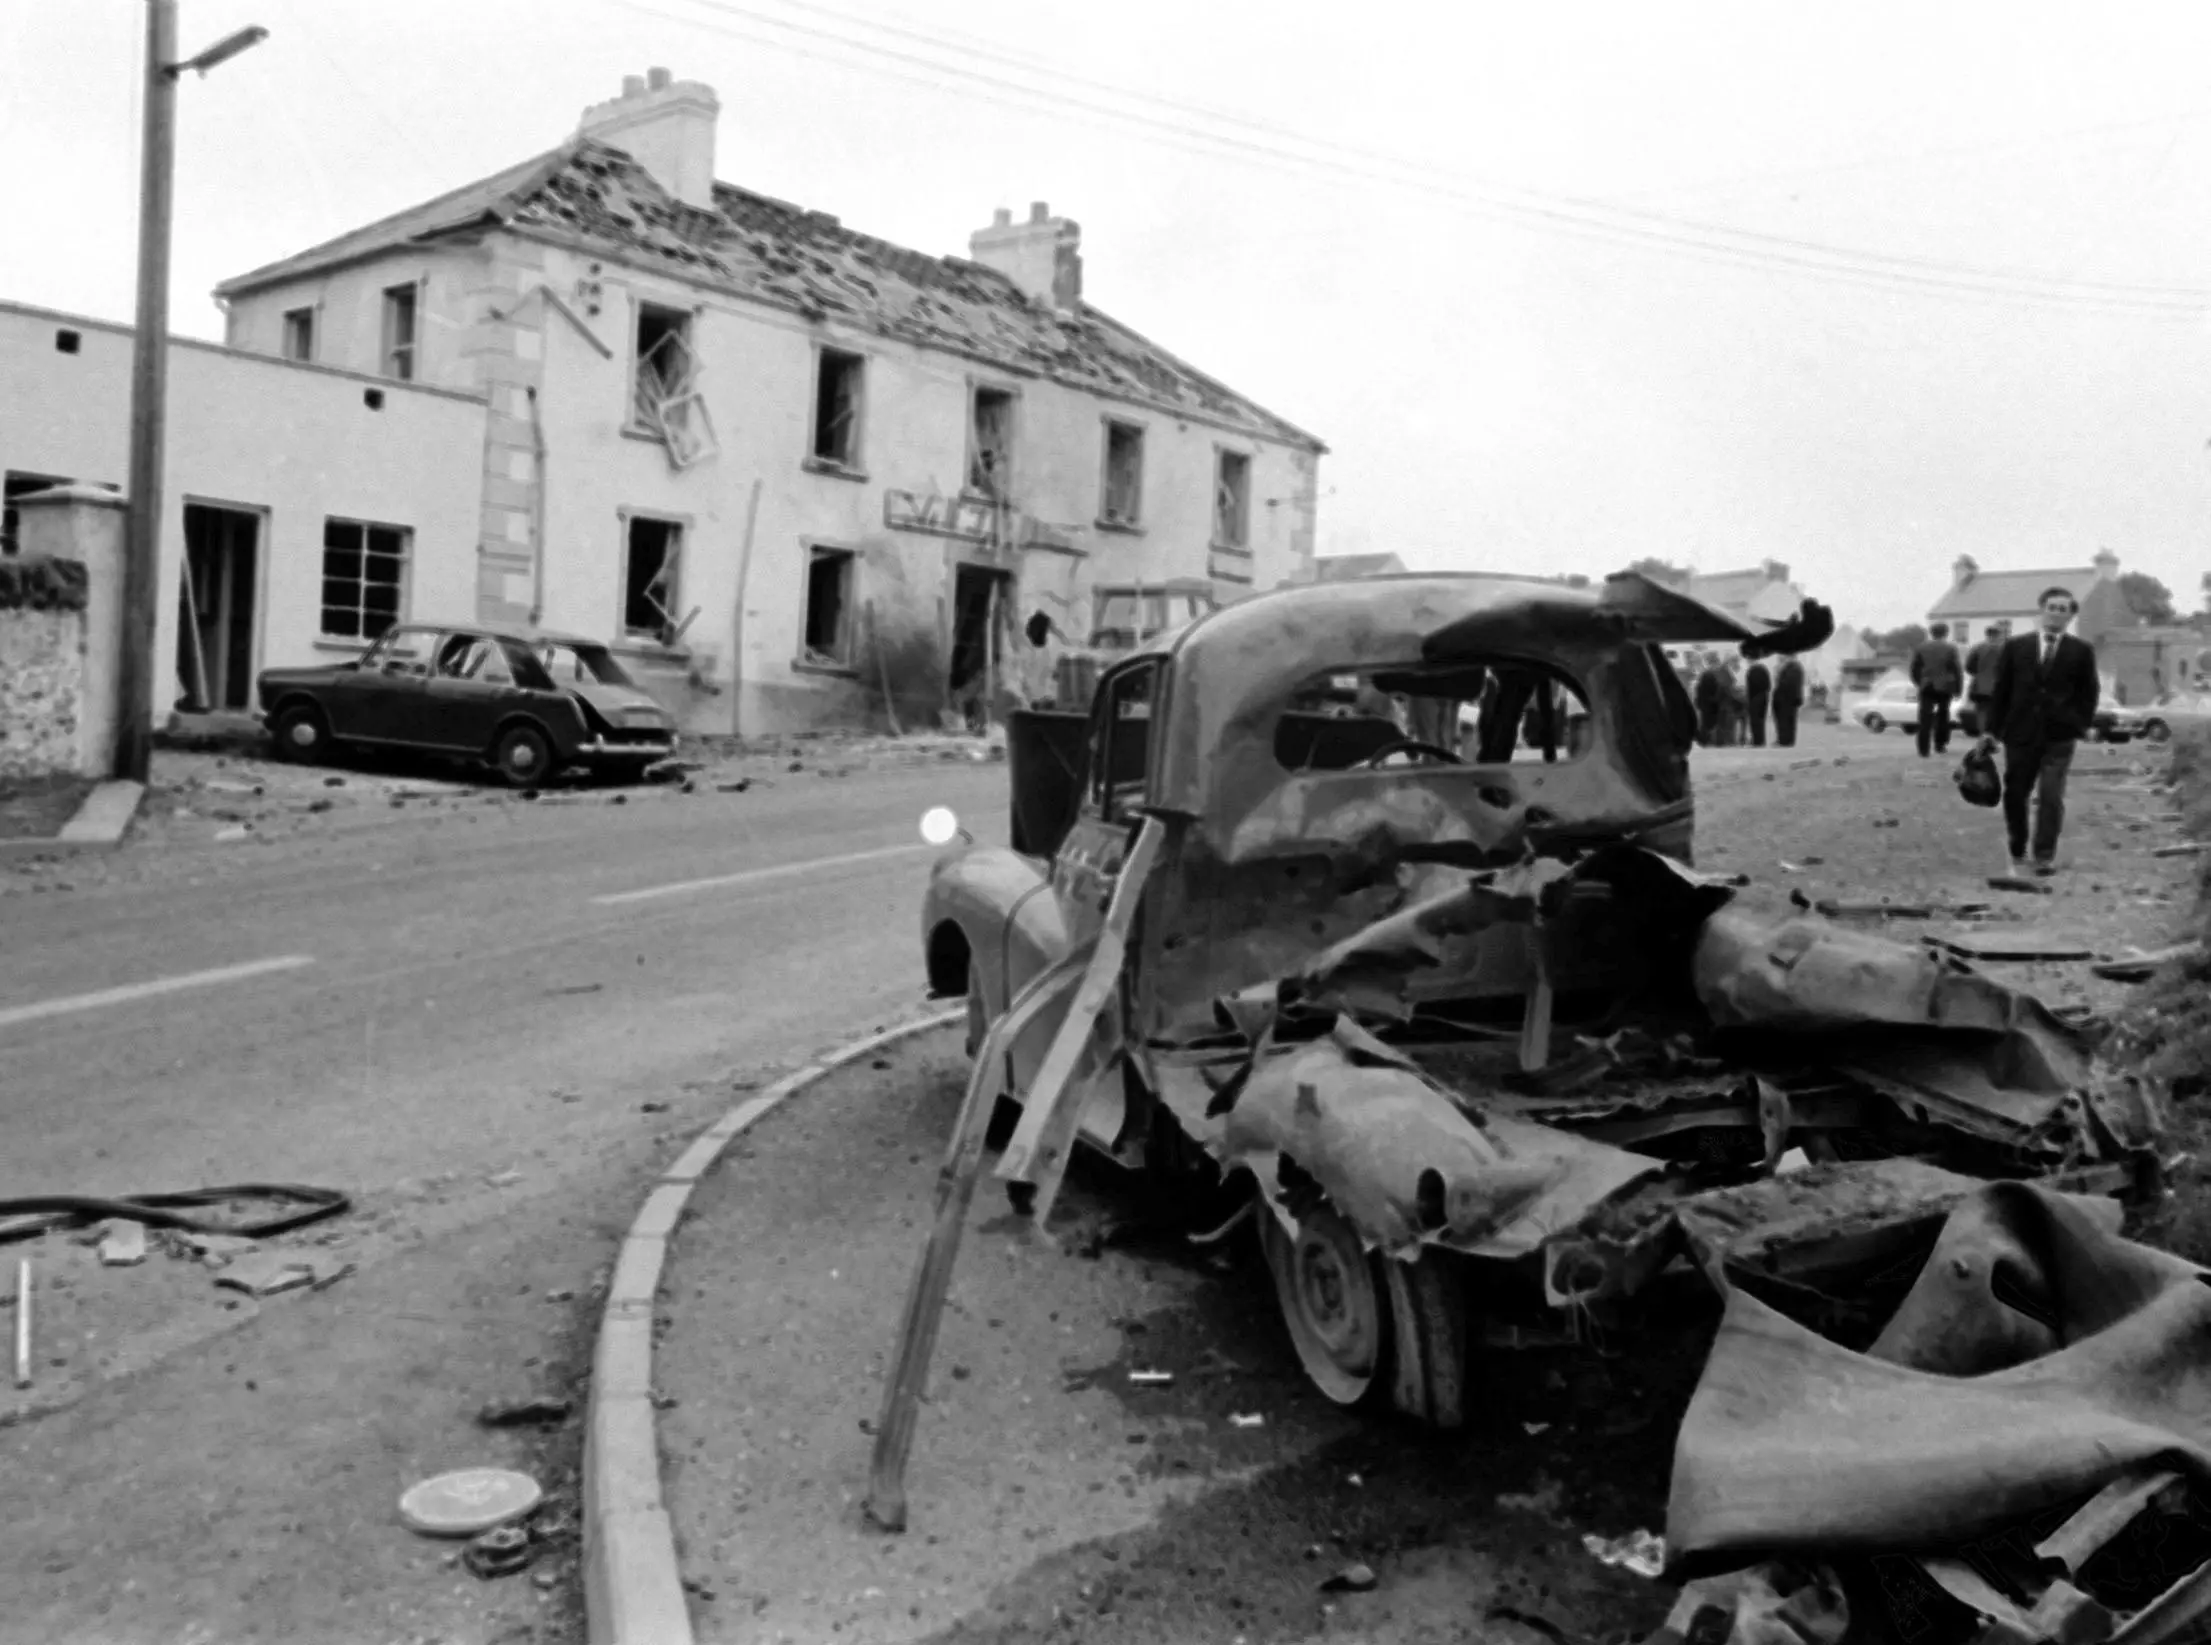 Wreckage after a bombing during the Troubles in Claudy